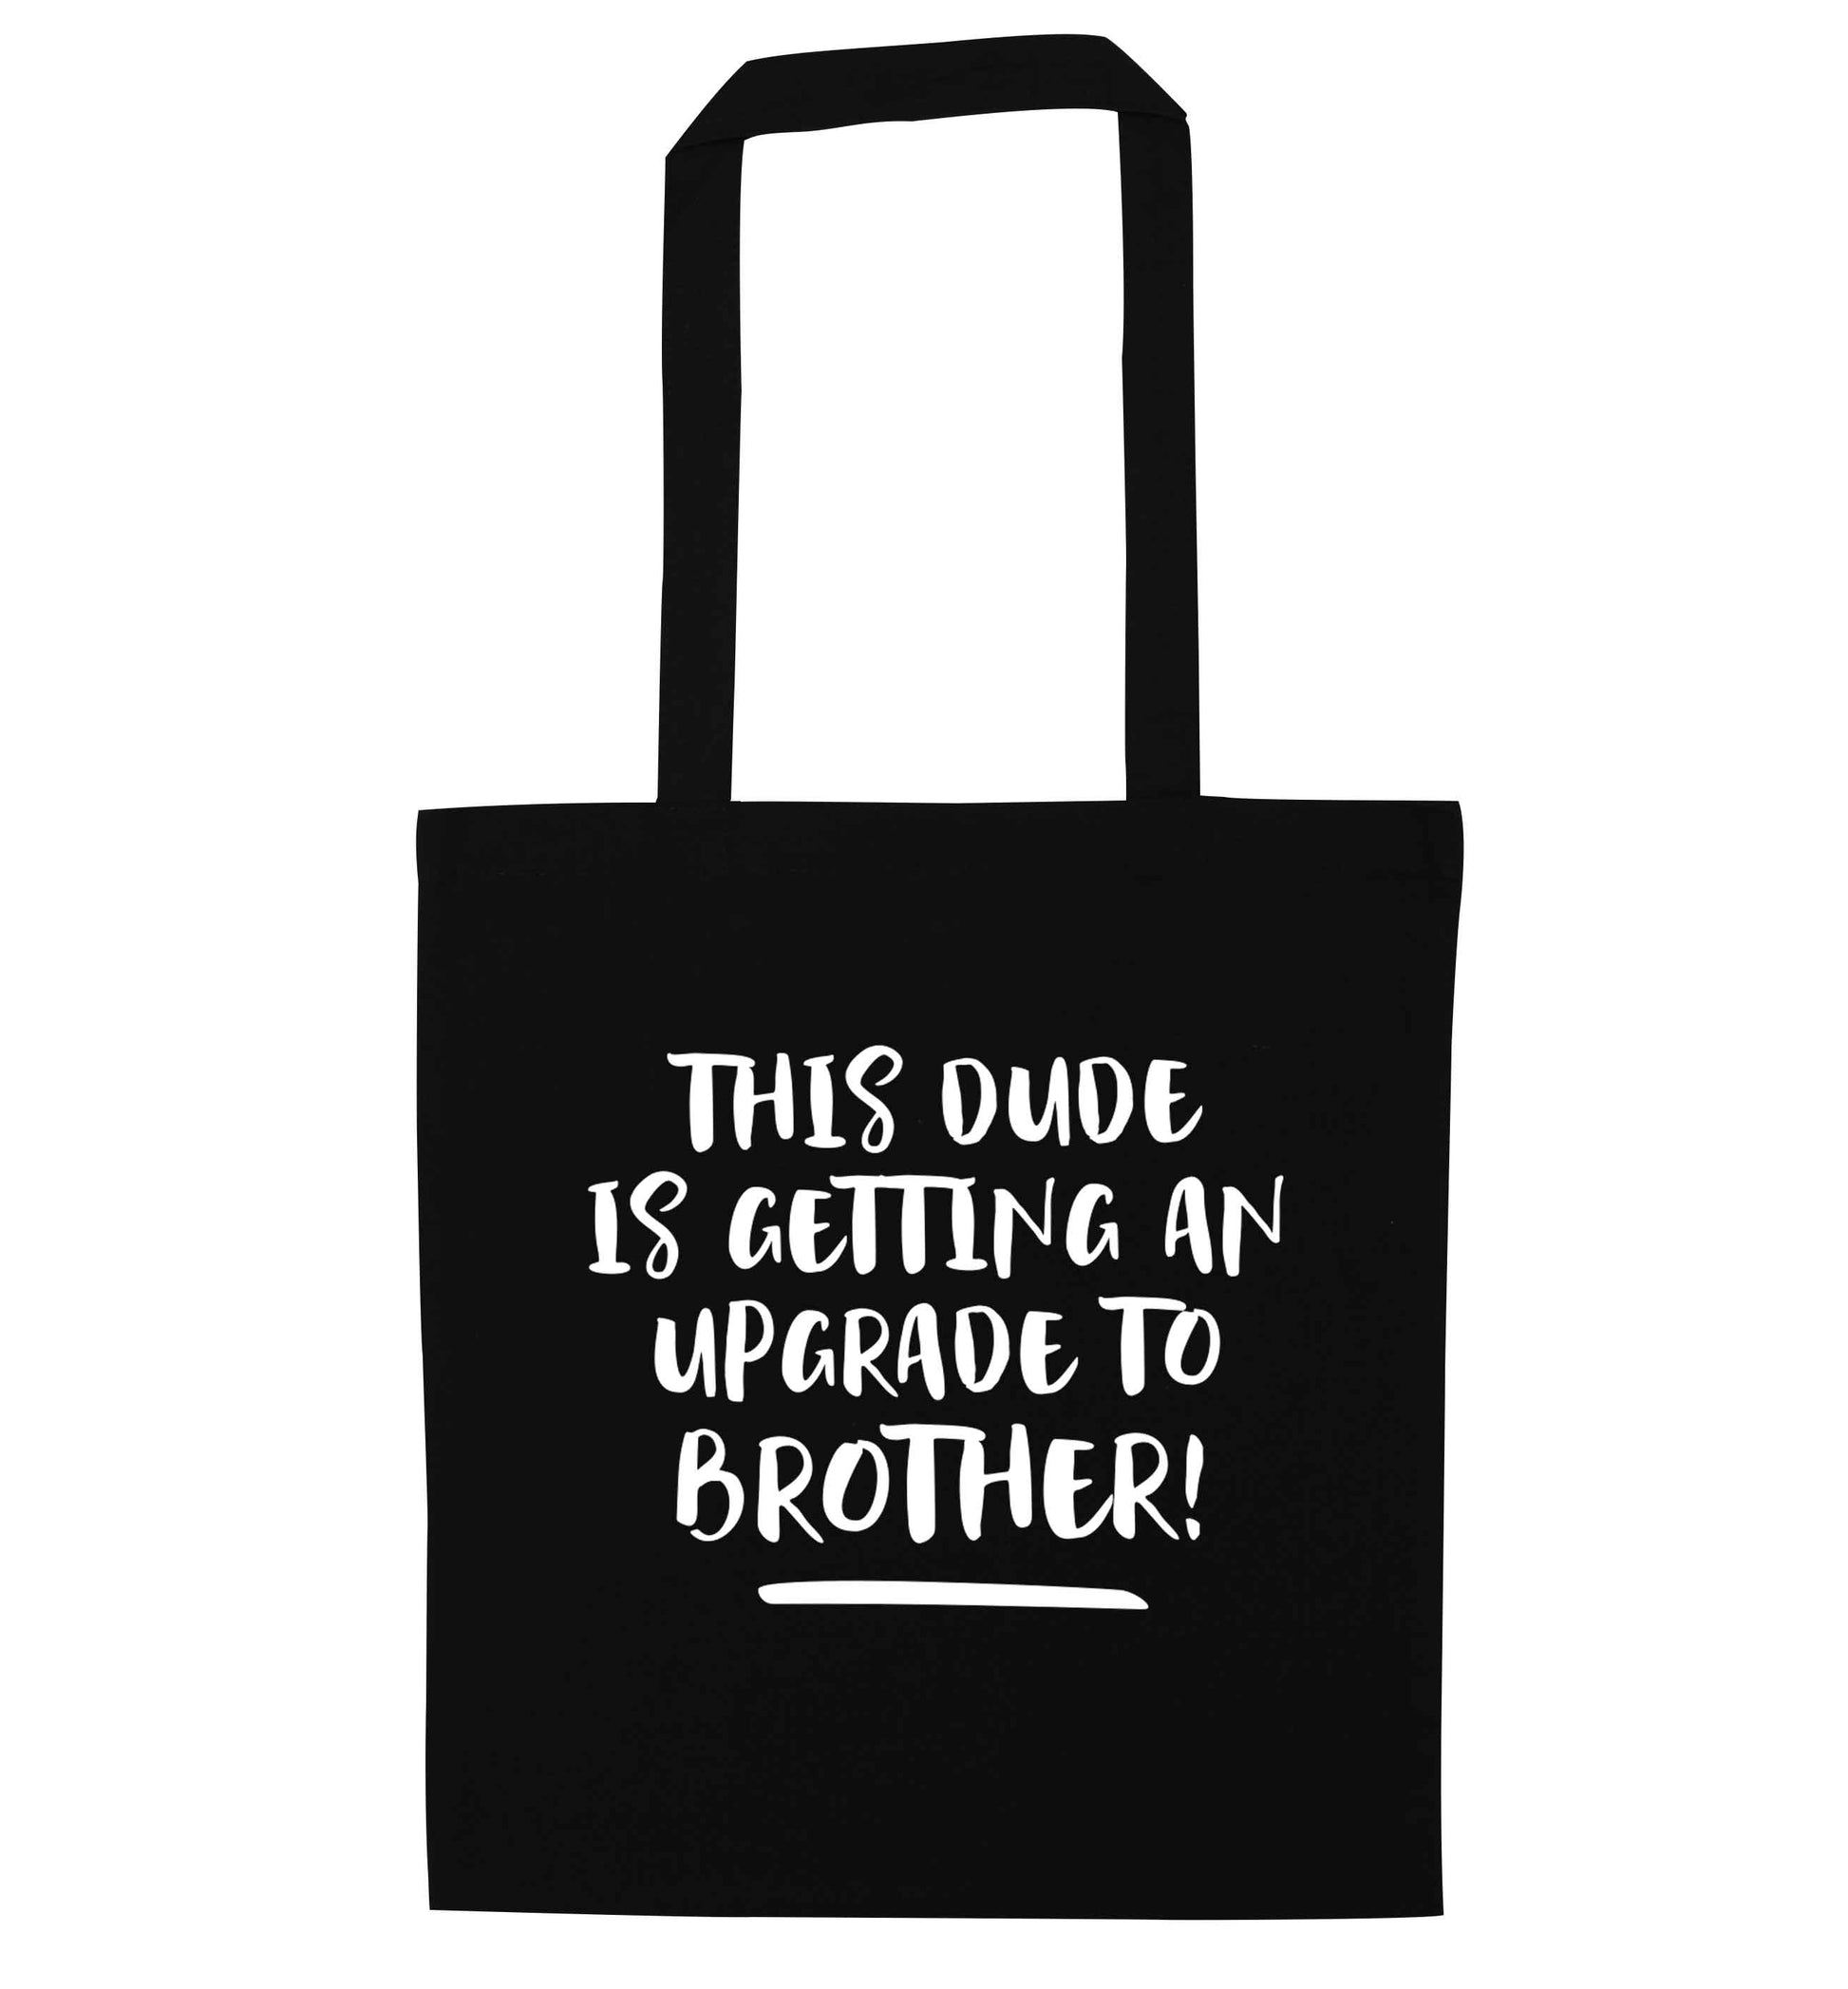 This dude is getting an upgrade to brother! black tote bag